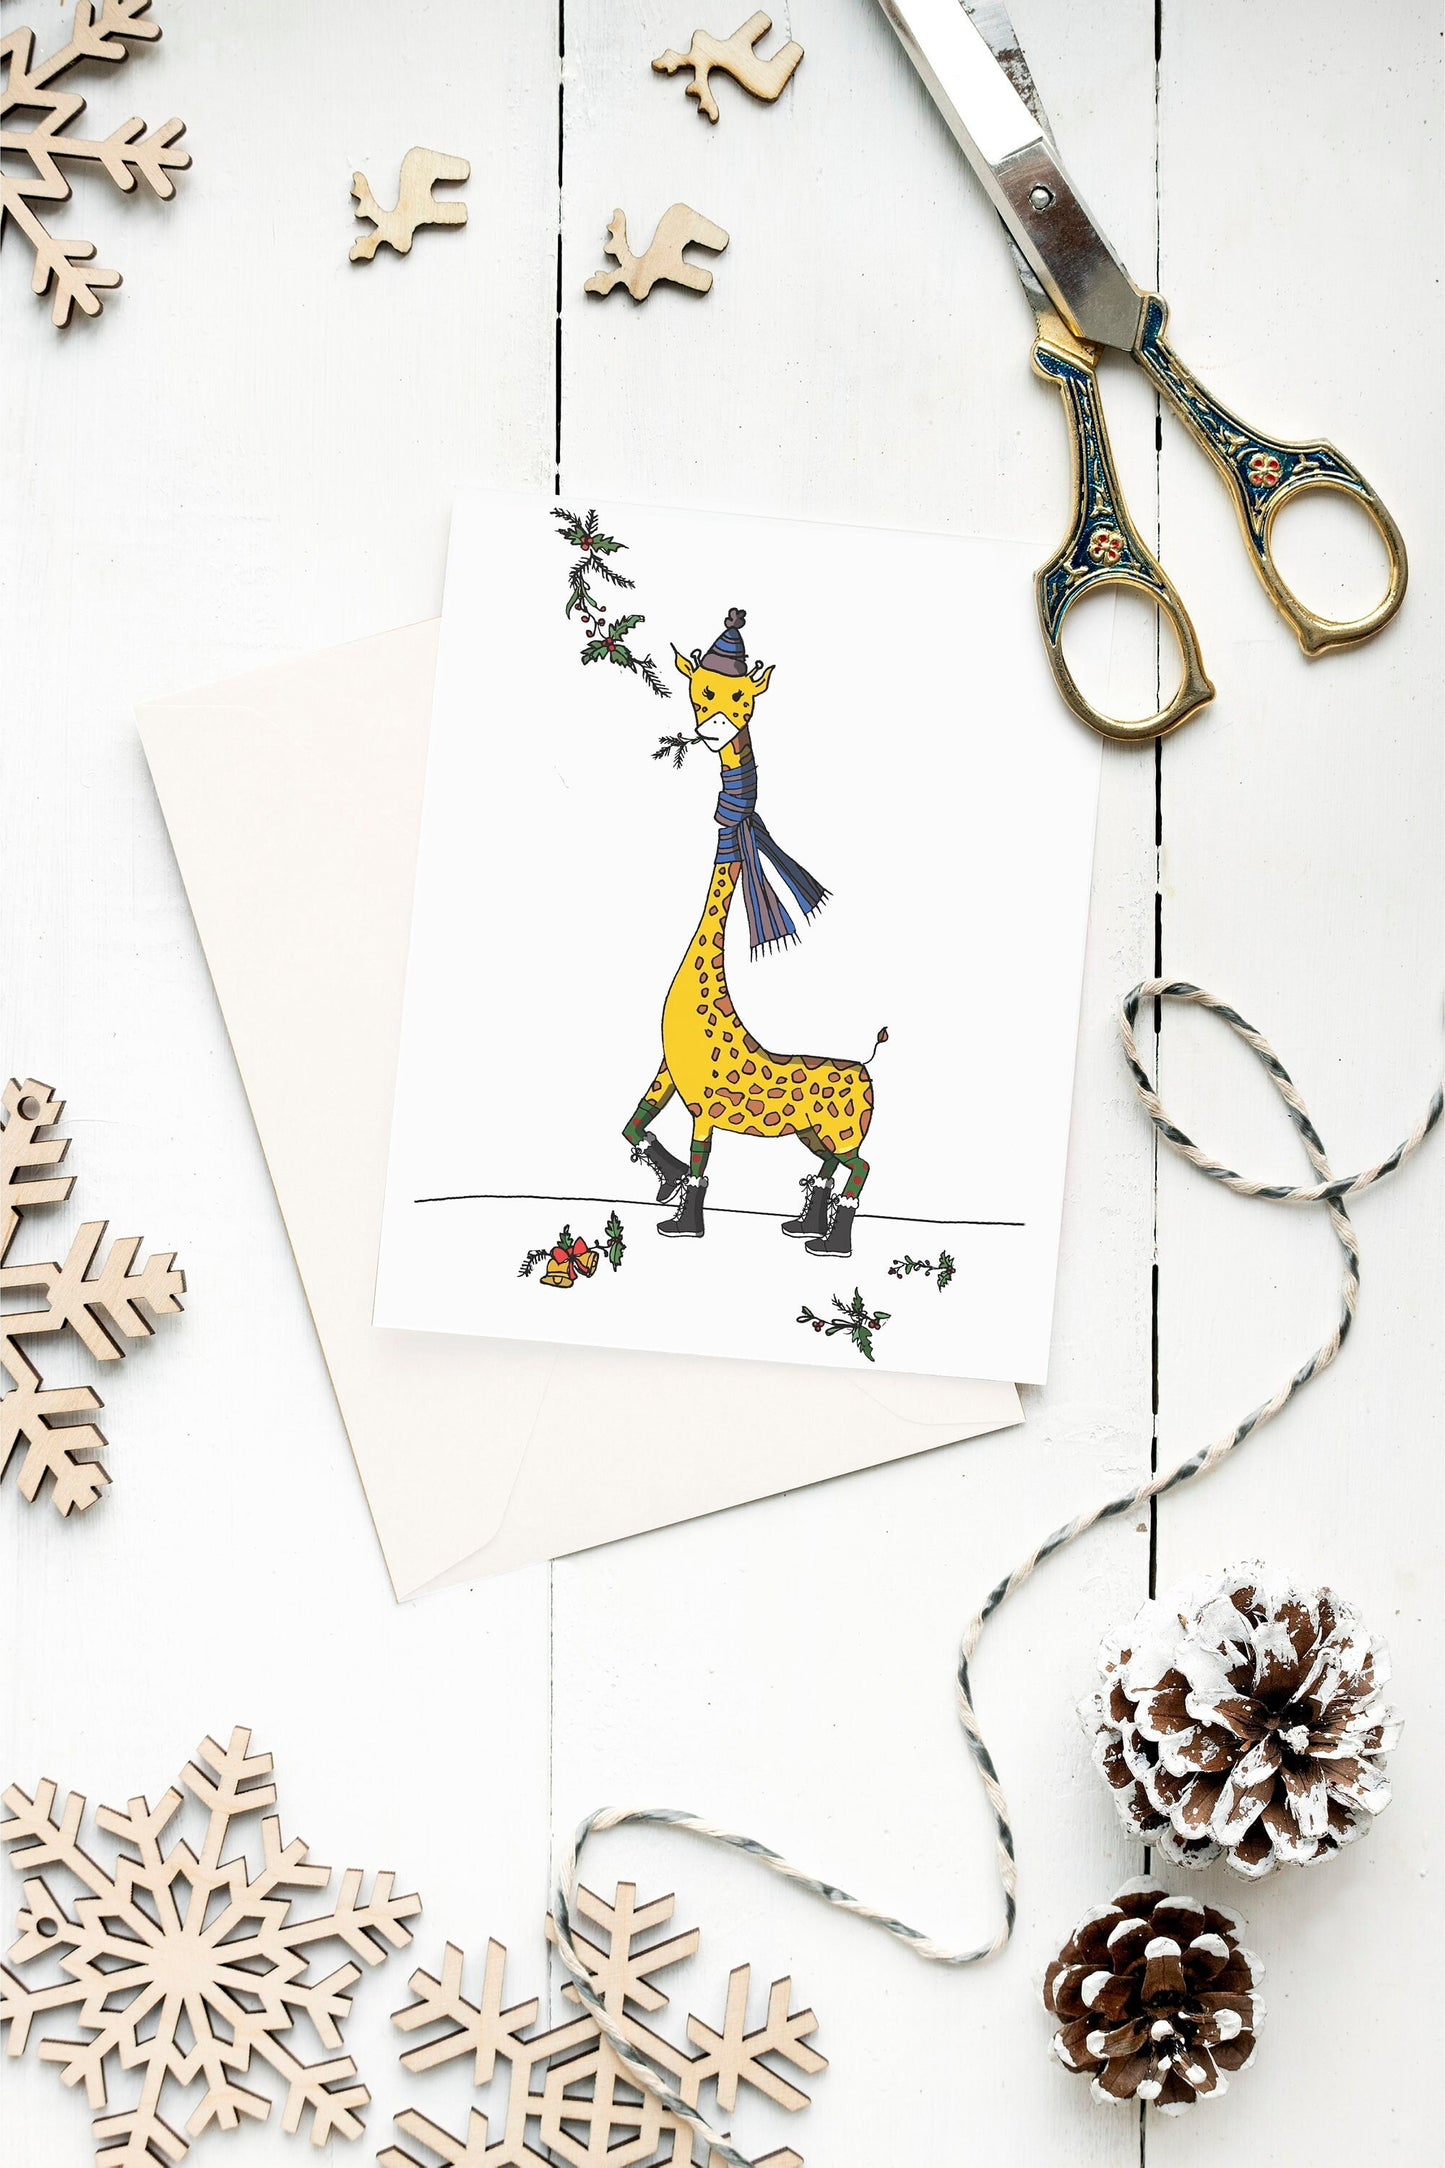 funny grumpy giraffe holiday card with mistletoe, funny and sarcastic greeting cards, unique christmas cards, witty winter cards